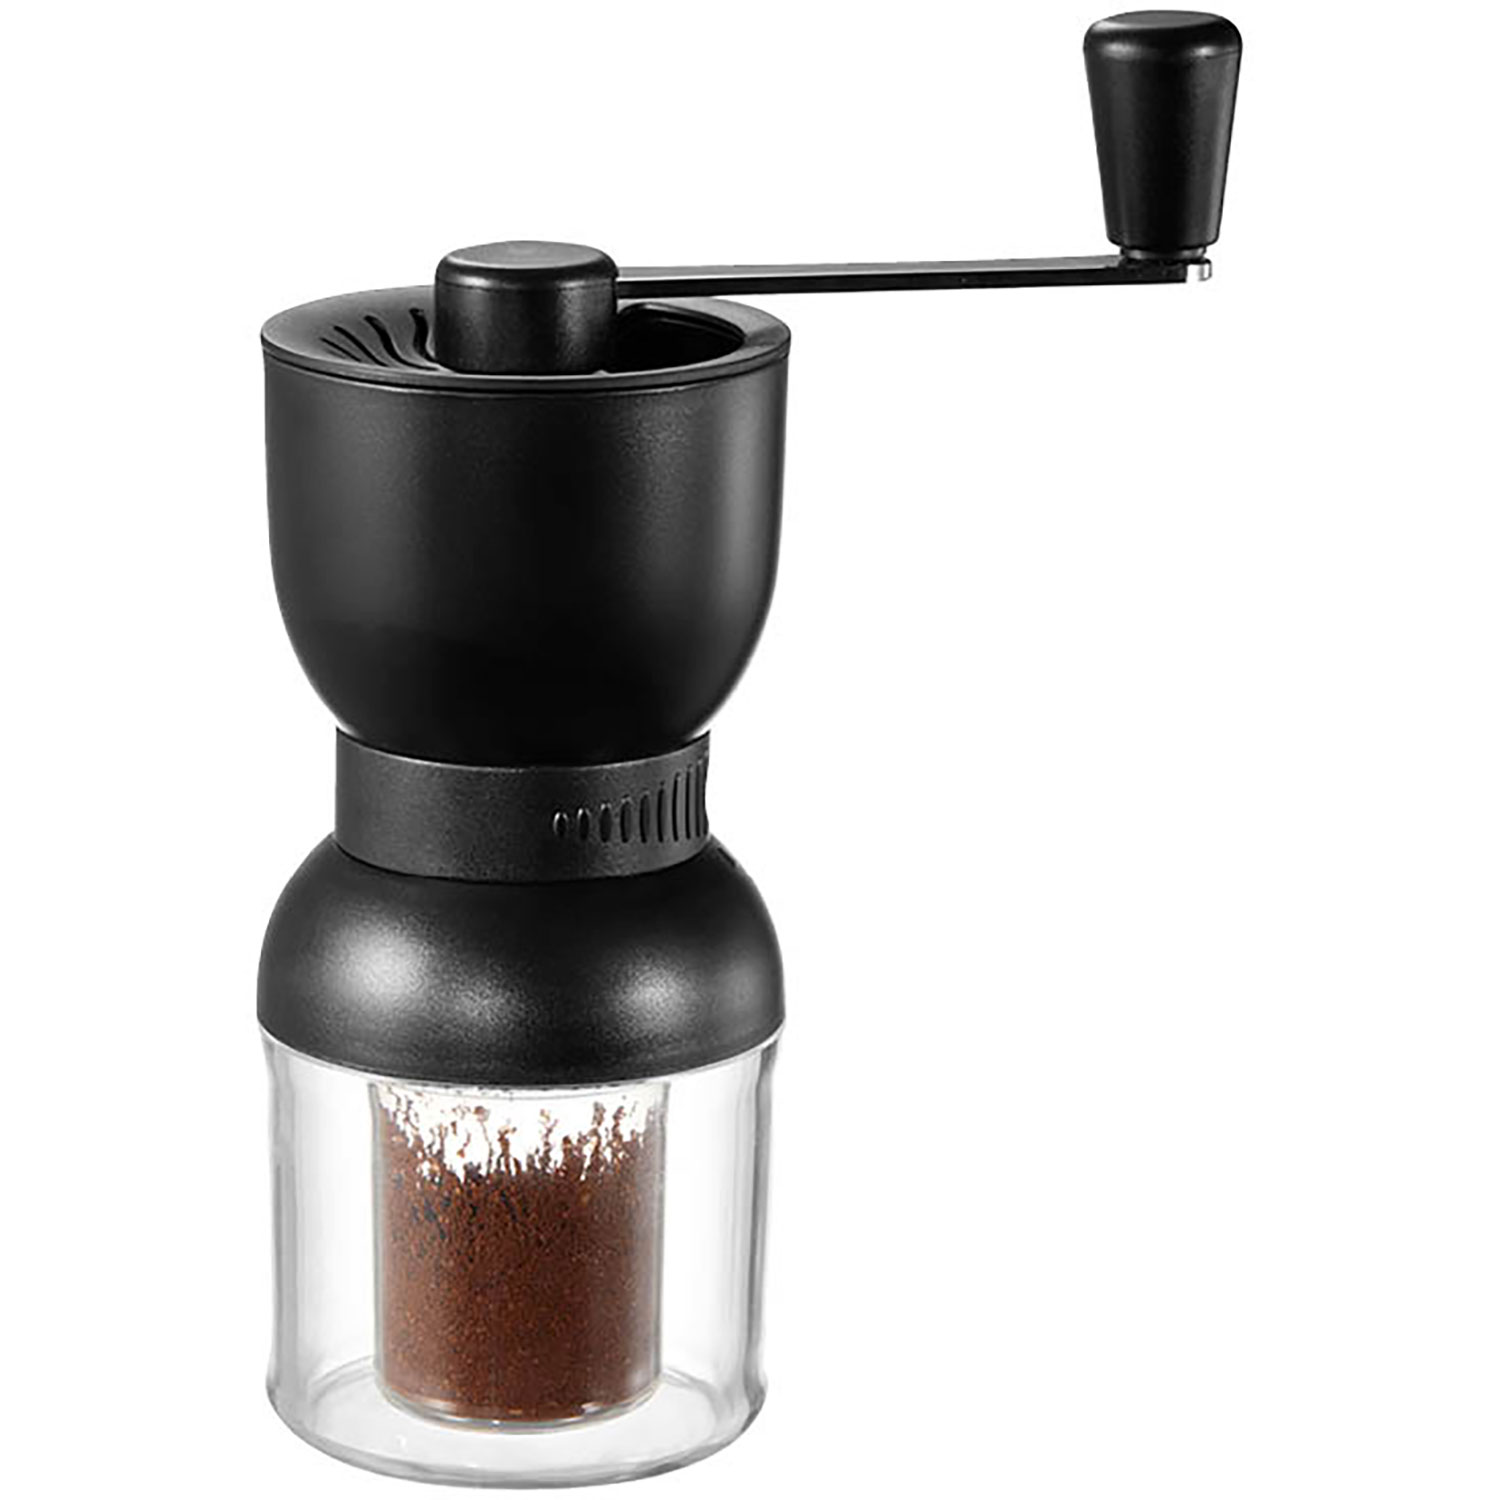 Burr mill coffee grinder - household items - by owner - housewares